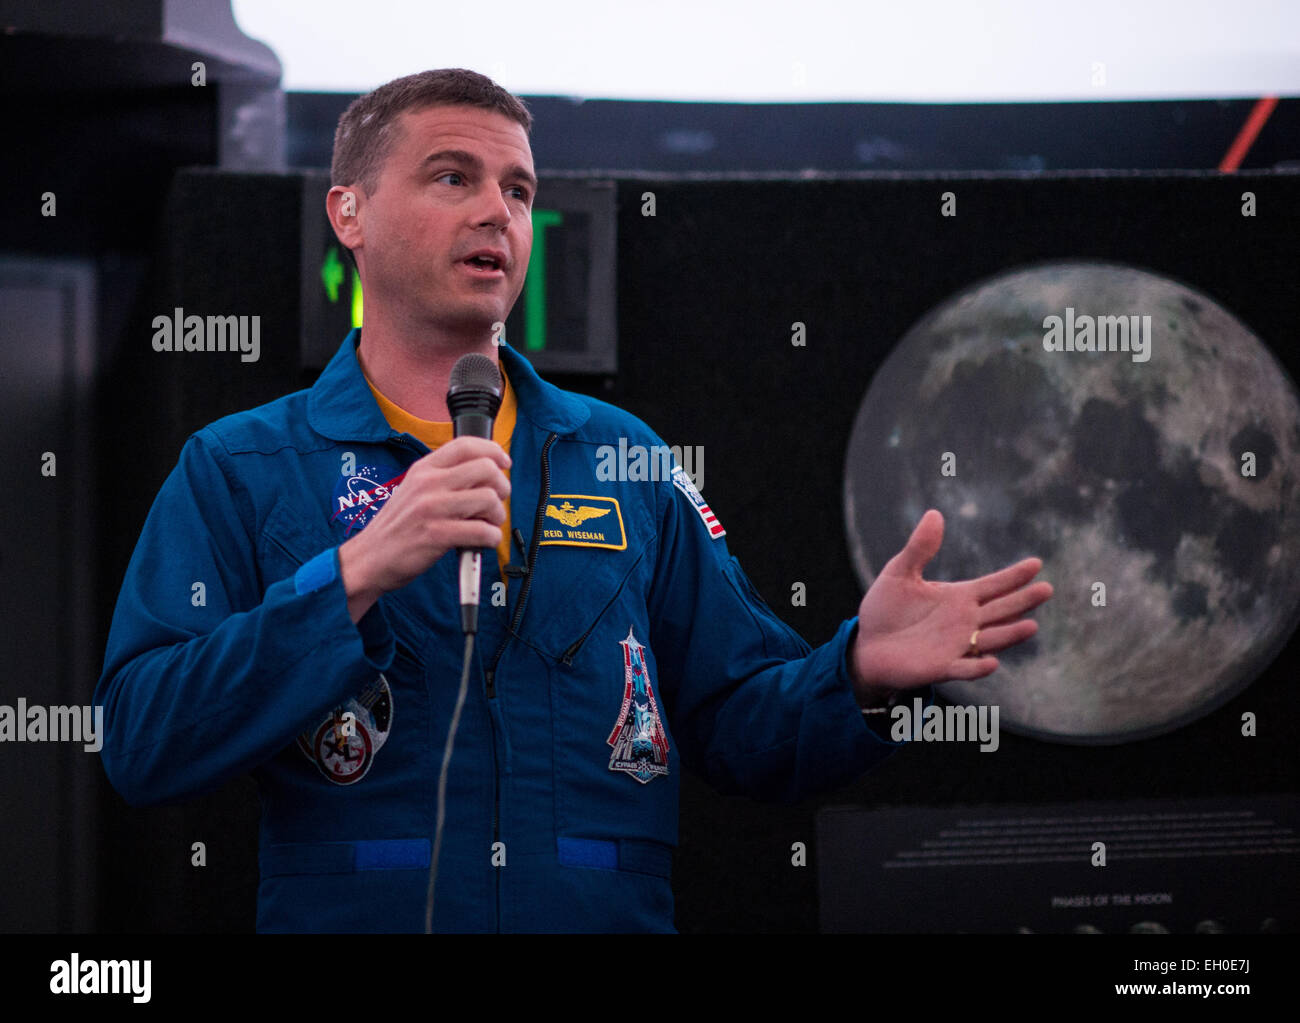 NASA Astronaut Reid Wiseman explains what it was like to live on the International Space Station for 6 months to visitors at the Maryland Science Center in his hometown Baltimore, Md. on Wednesday, February 11, 2015. Wiseman served on Expeditions 40 and 41 with Maxim Suraev of the Russian Federal Space Agency (Roscosmos) and Alexander Gerst  of ESA (European Space Agency), and returned home in November 2014. Stock Photo